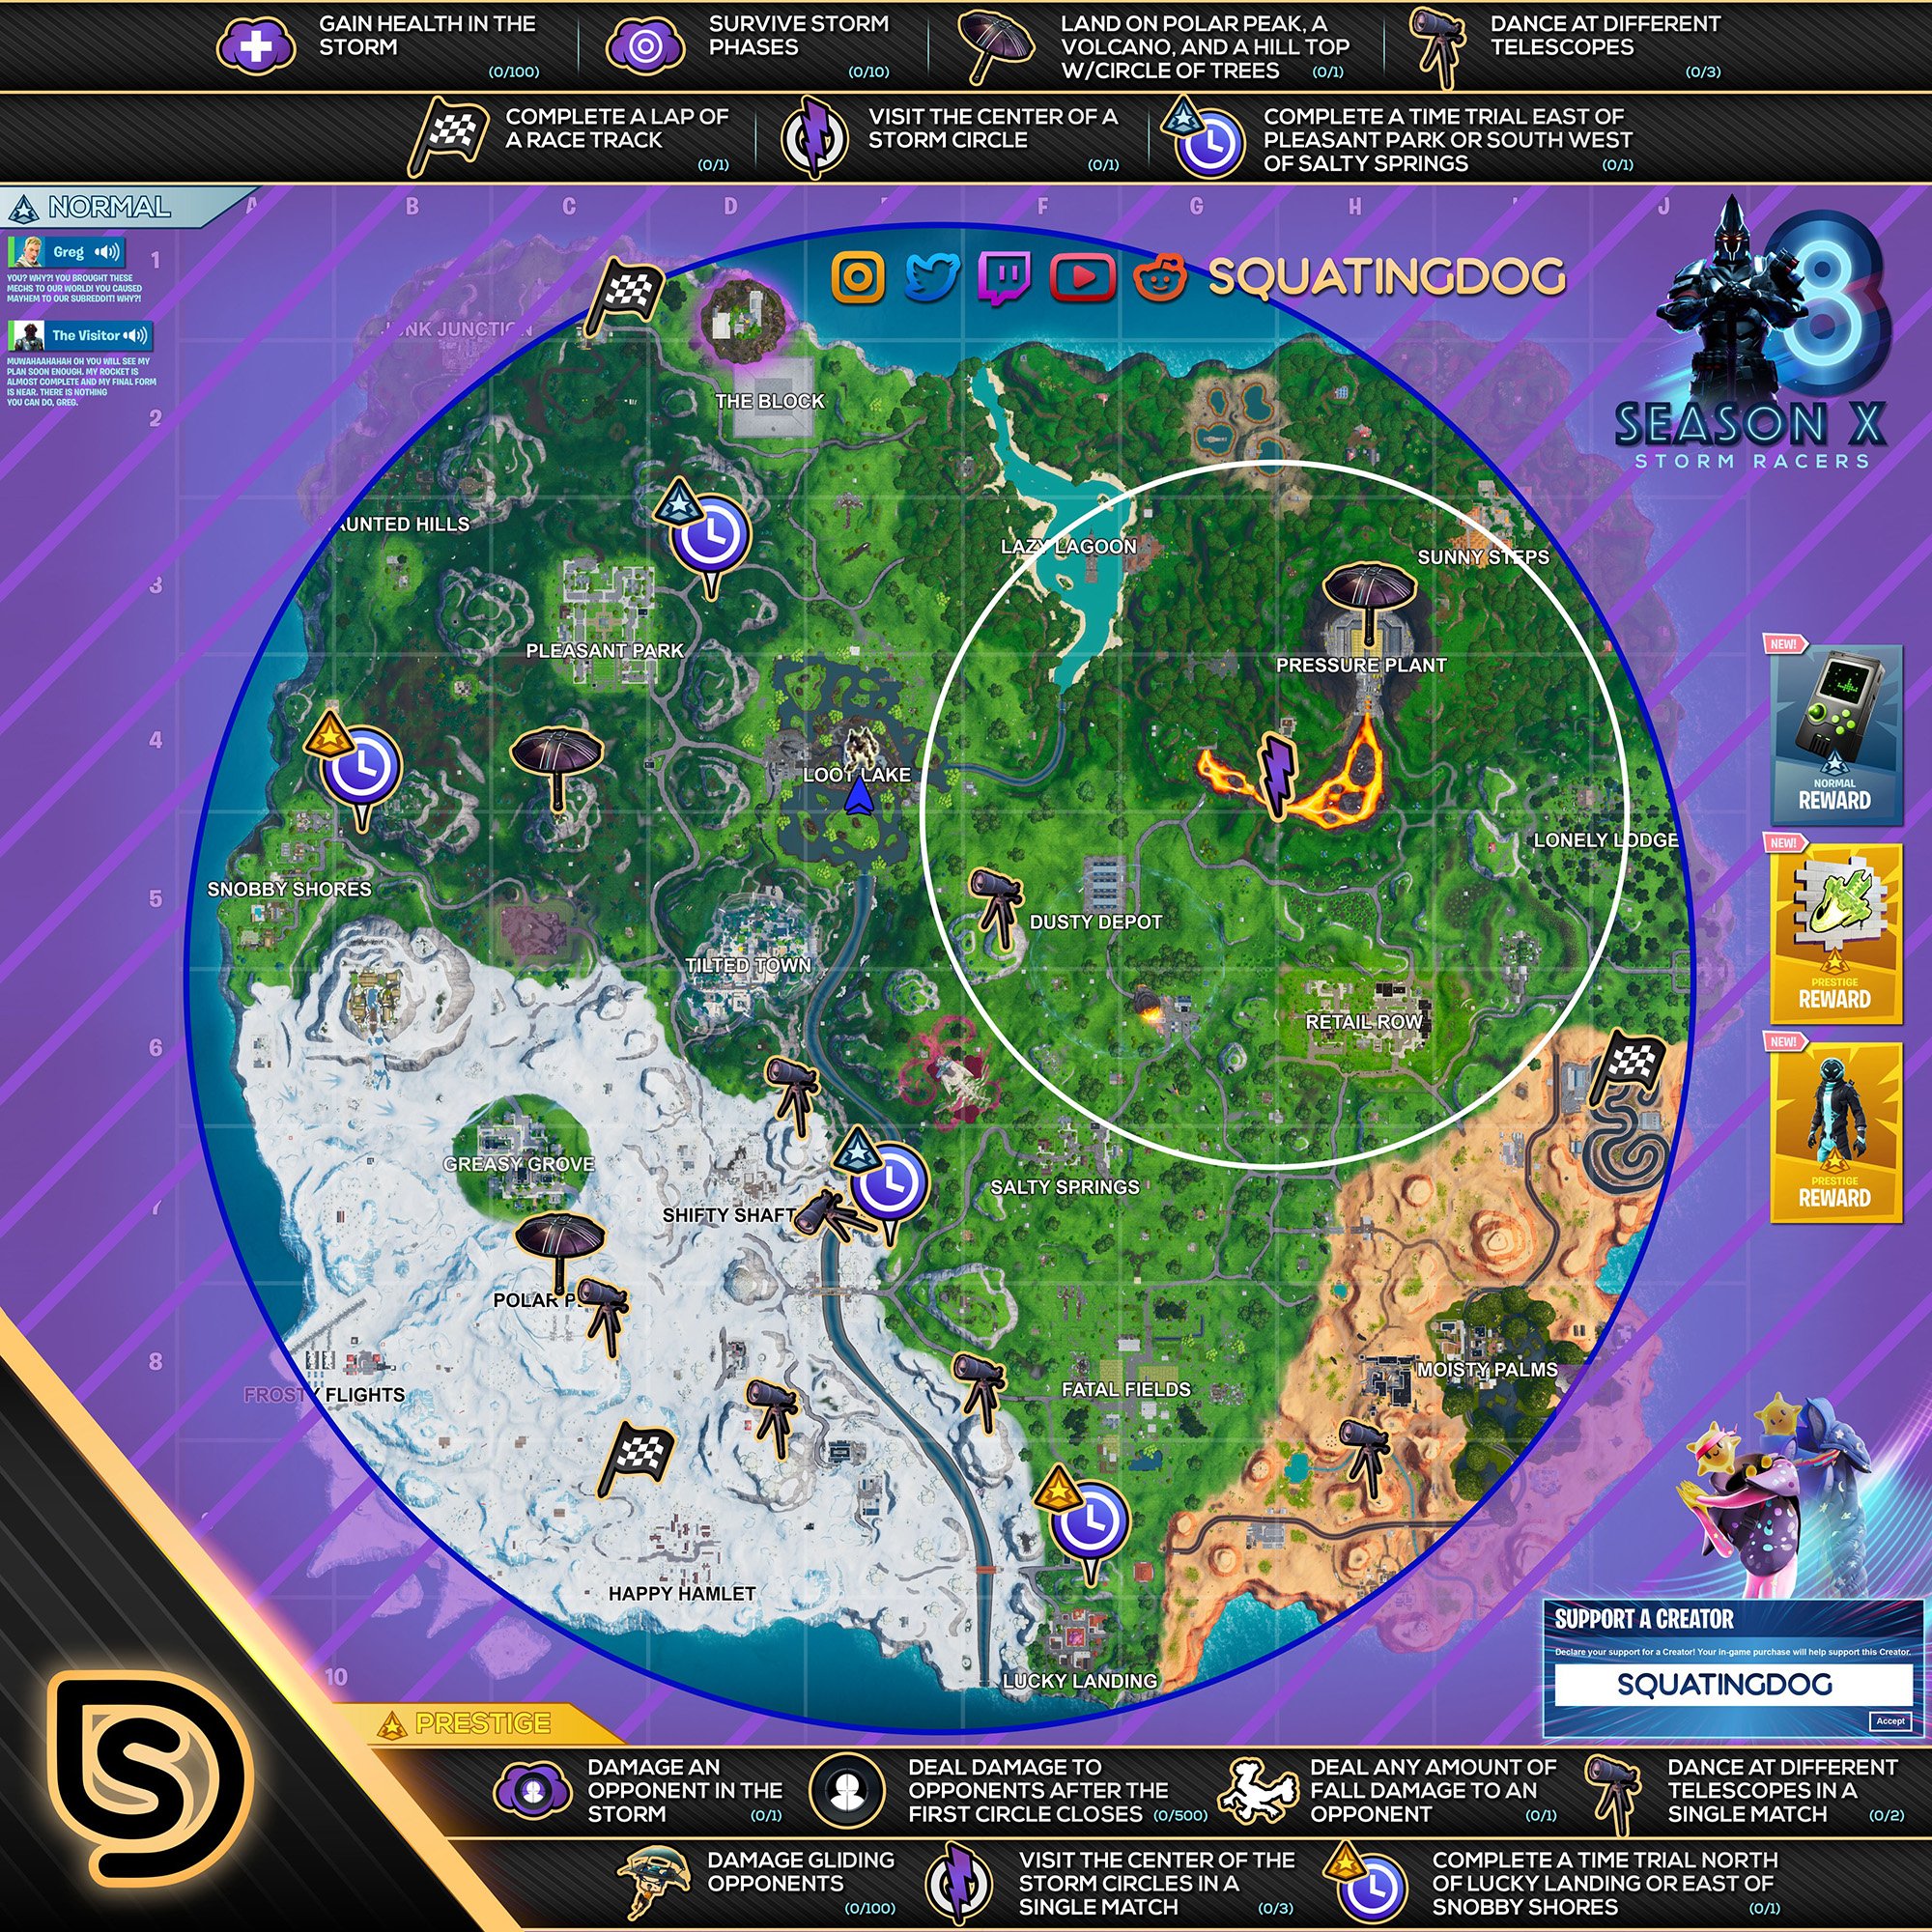 Fortnite Storm Racers Challenges Guide Cheat Sheet Missions Rewards Pro Game Guides - cheat sheet roblox